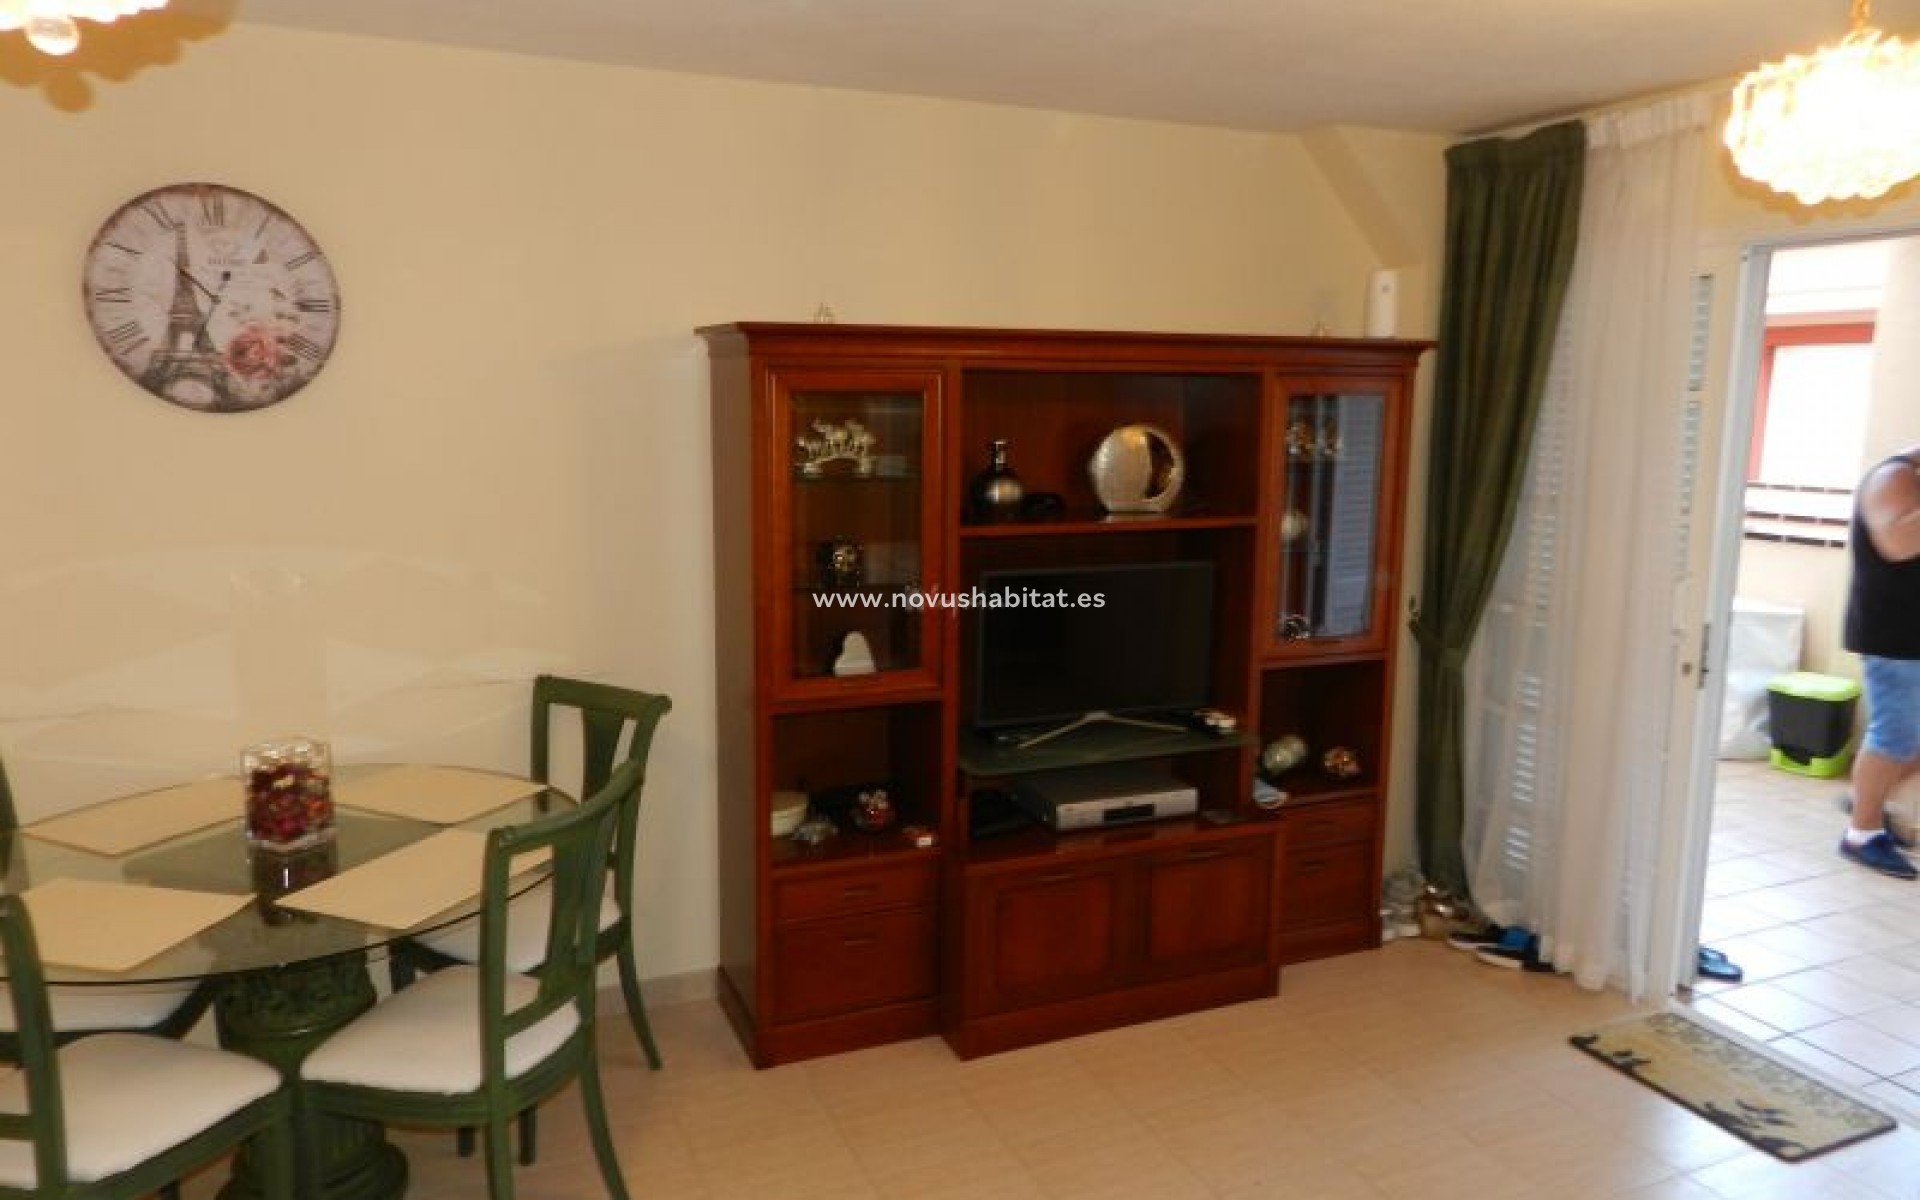 Resale - Apartment - Los Cristianos - The Heights Los Cristianos Tenerife